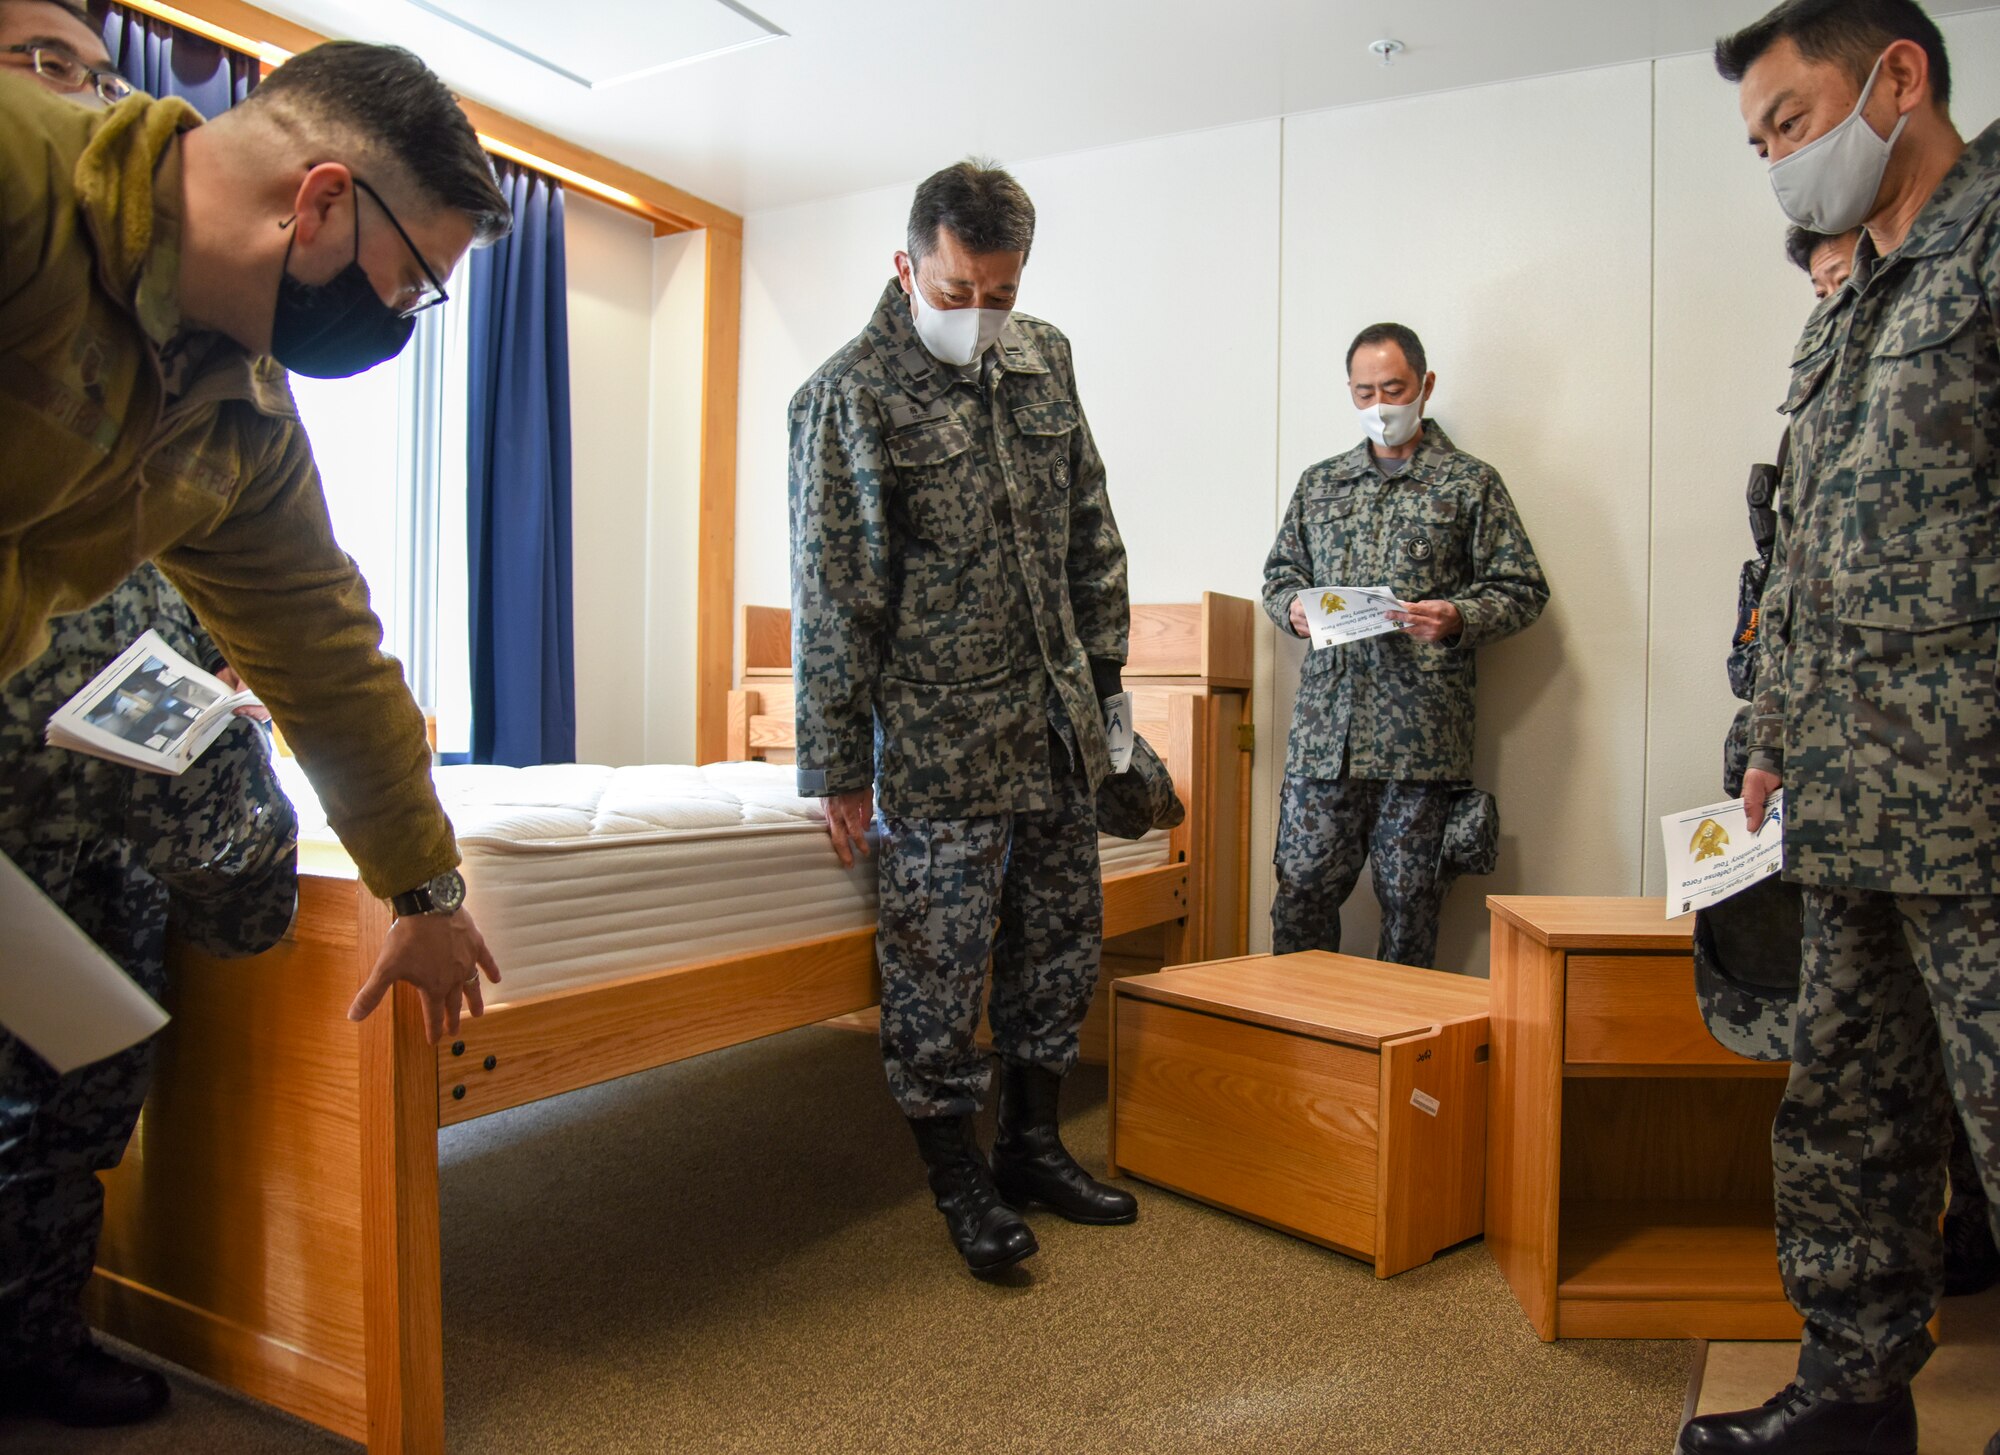 U.S. Air Force Master Sgt. William Castro, 35th Civil Engineer Squadron Unaccompanied Housing superintendent, explains the purpose of the furniture layout to Japan Air Self-Defense Force 3rd Air Wing leaders during a tour of the unaccompanied housing dormitory campus at Misawa Air Base, Japan, Feb. 26, 2021. As they are in the process of upgrading their unaccompanied housing living quarters, the JASDF leaders took the tour to gain some perspective on how the 35th Fighter Wing manages its dormitory campus. (U.S. Air Force photo by Tech. Sgt. Timothy Moore)